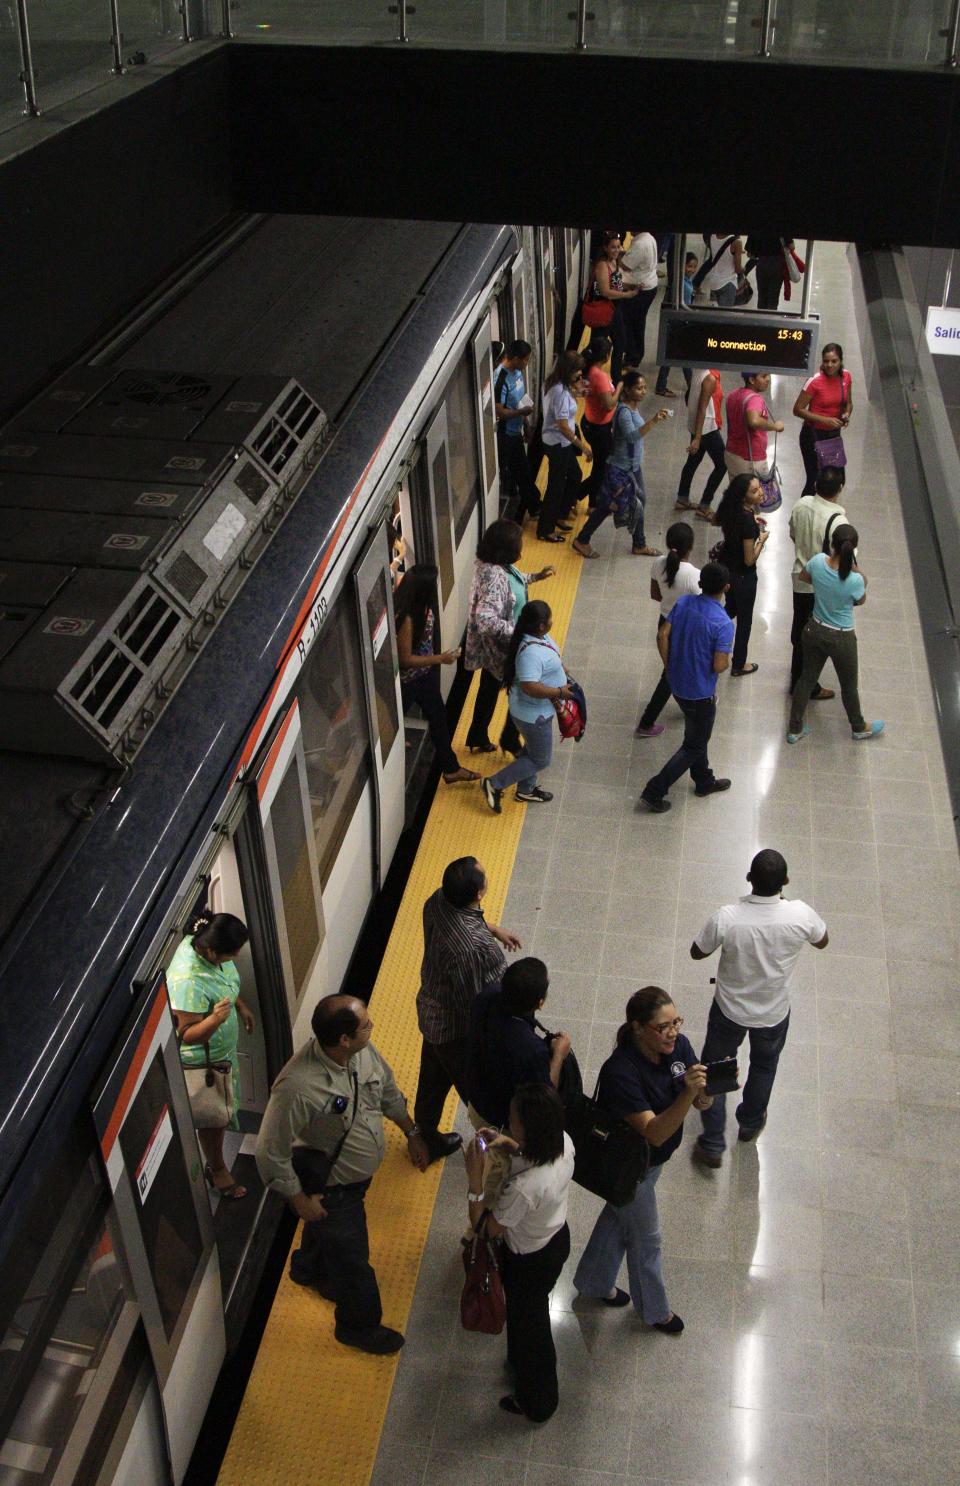 In this Wednesday, April 2, 2014 photo, government employees and their guests disembark from a subway while participating in an invitation to test the wagons of the new Panama Metro in Panama City. Central America’s first underground metro will surely alleviate the booming capital’s dreadful traffic. But critics say the $2 billion spent on the 14-kilometer rail project, which was marred by cost overruns, would’ve been better used building a higher-capacity, surface transport network. They also are blasting the timing of the over-the-top inauguration set for Saturday, April 5, which they say is a political stunt by President Ricardo Martinelli to drum up support for his preferred successor. (AP Photo/Arnulfo Franco)